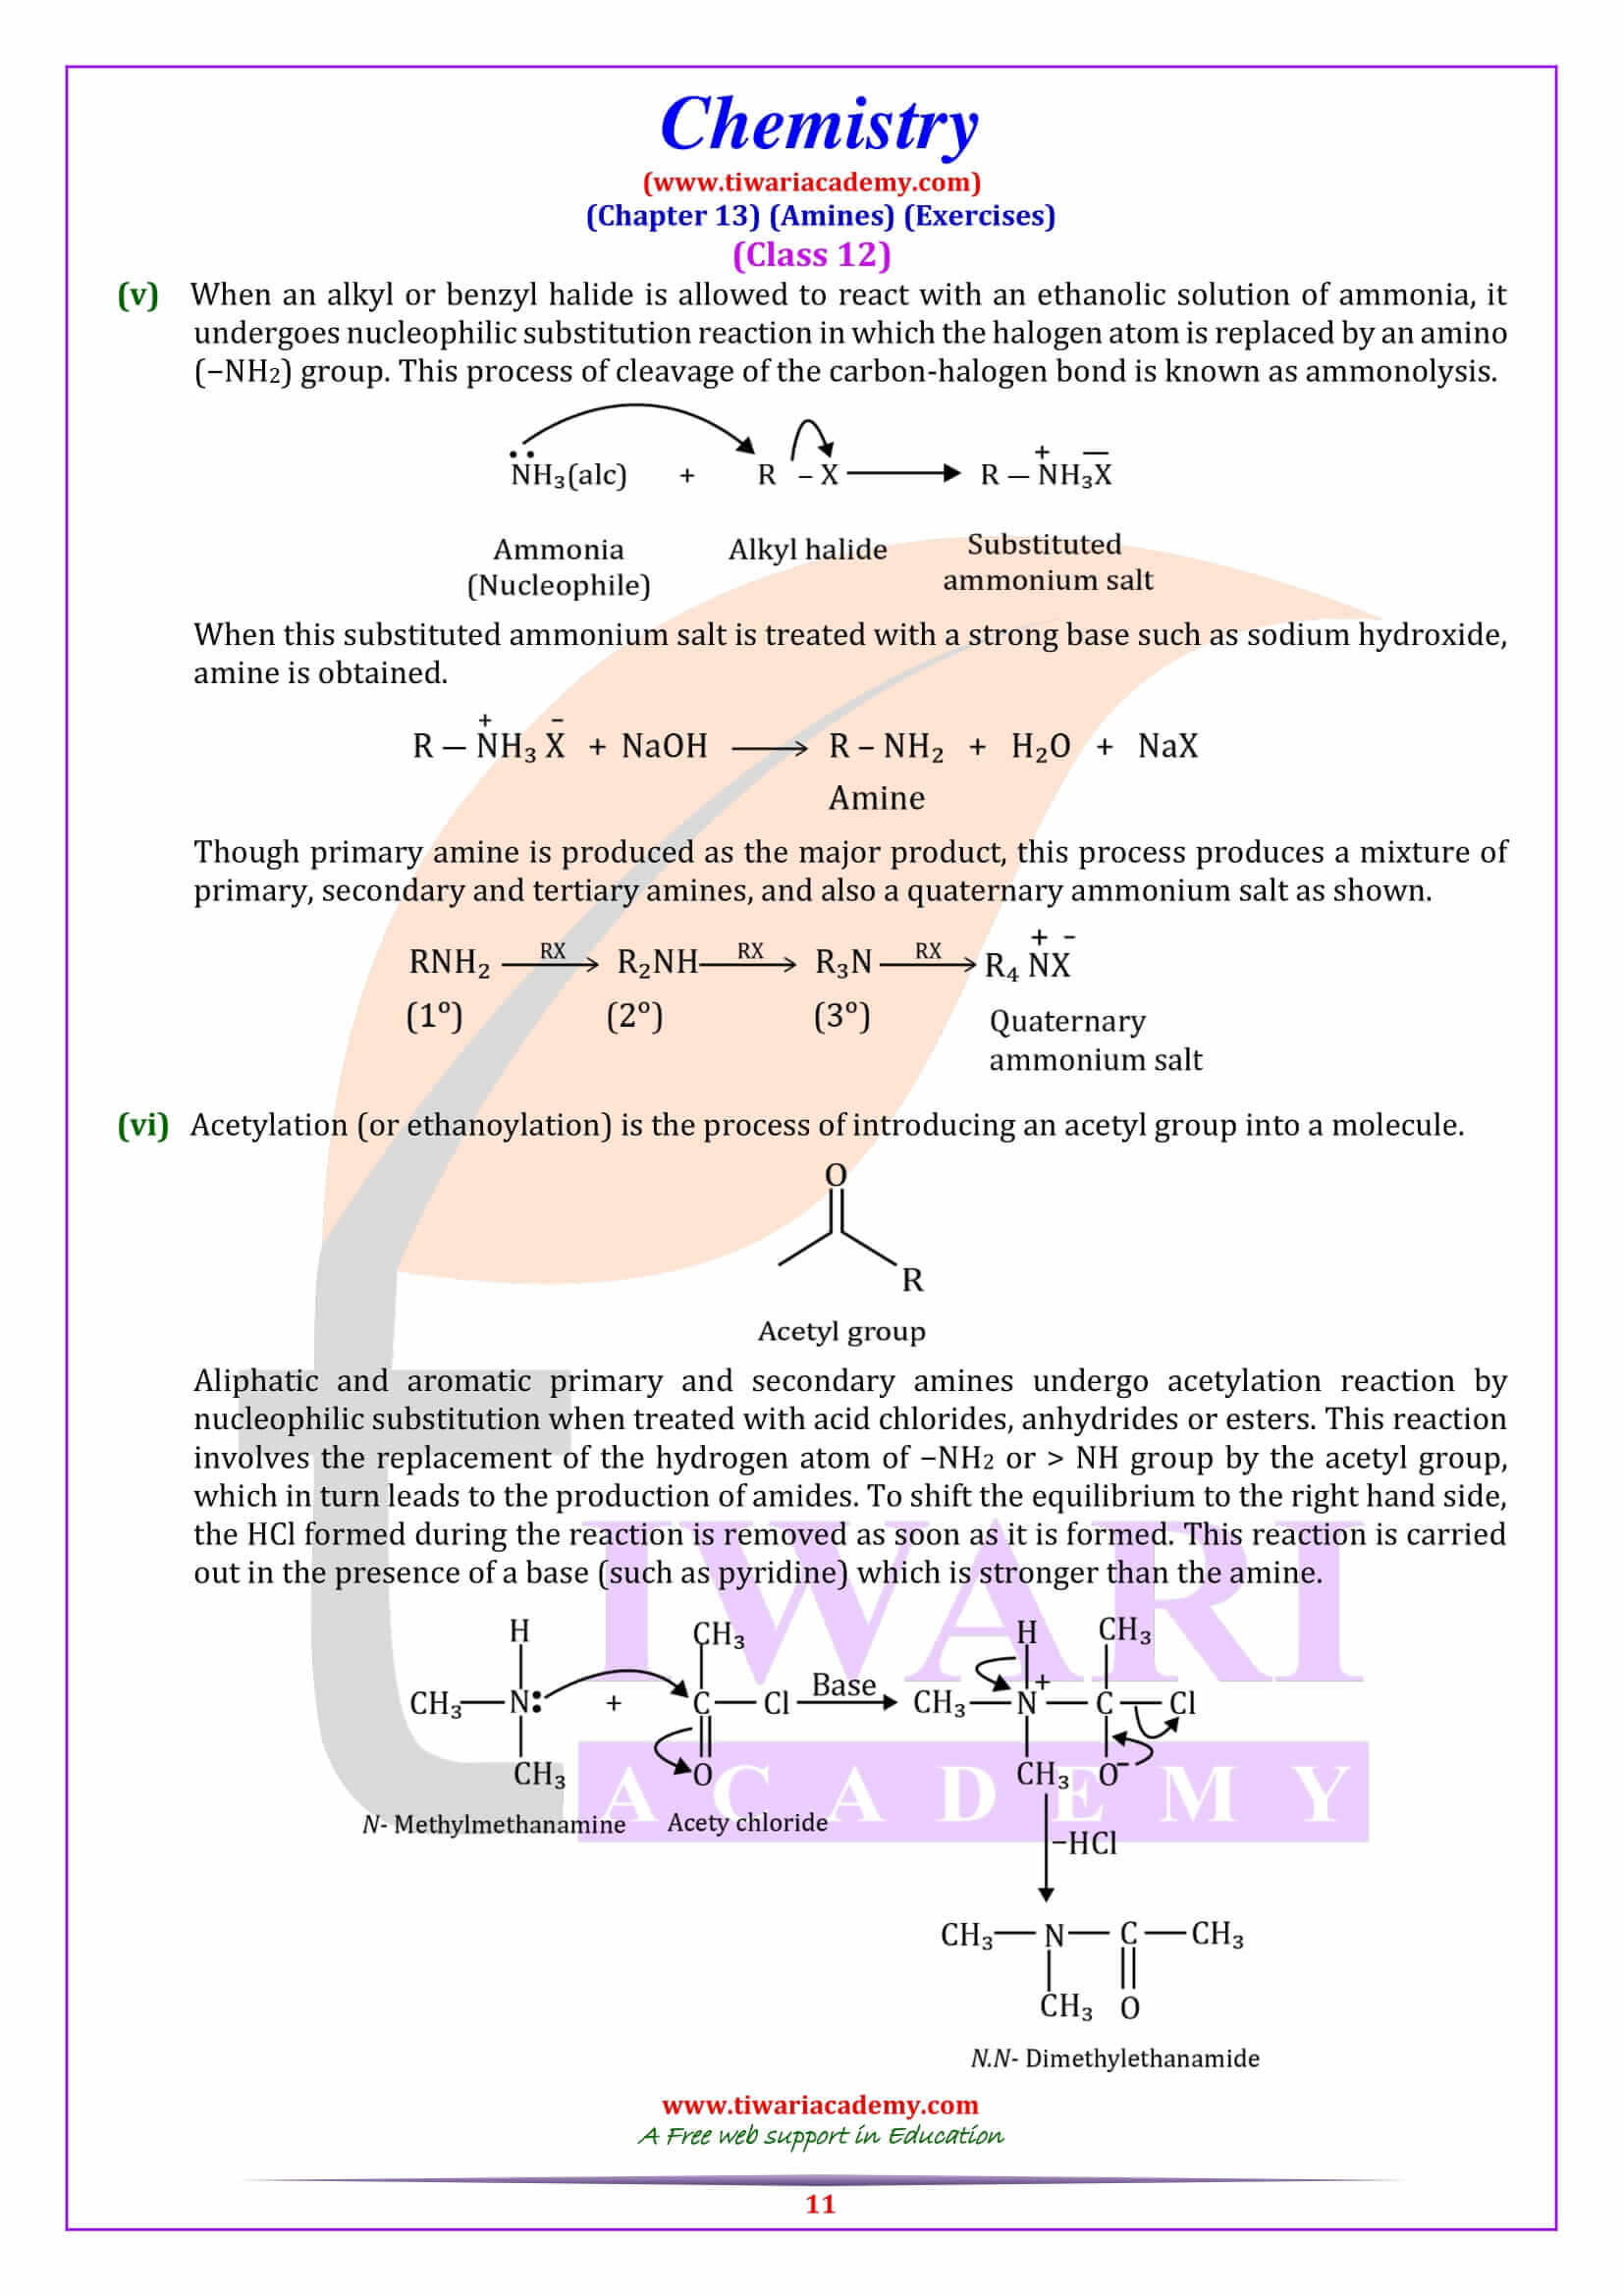 NCERT Solutions for Class 12 Chemistry Chapter 13 free guide